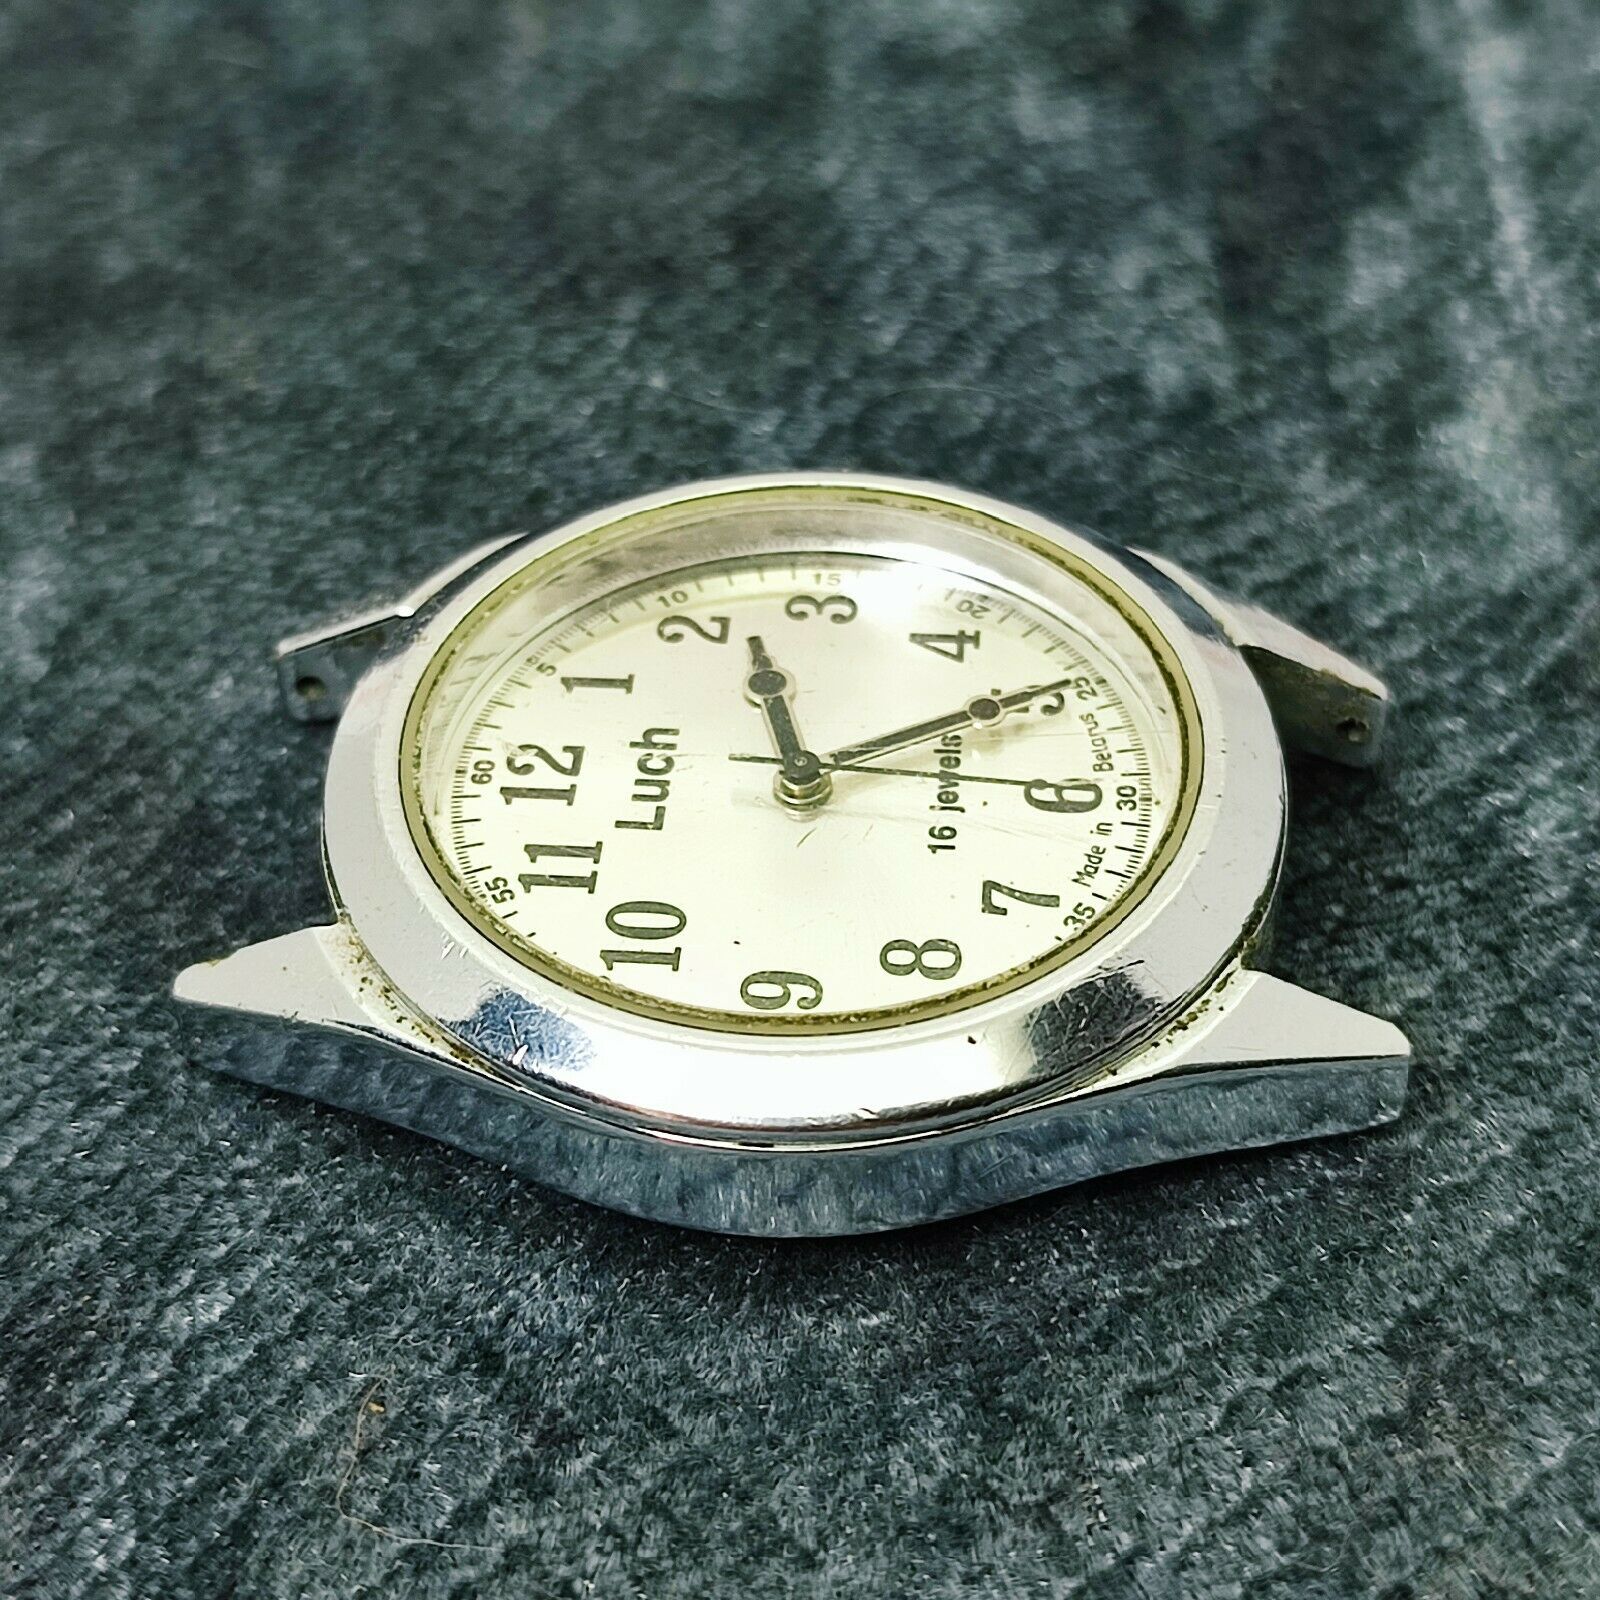 Luch] One-hand watch straight from Belarus : r/Watches